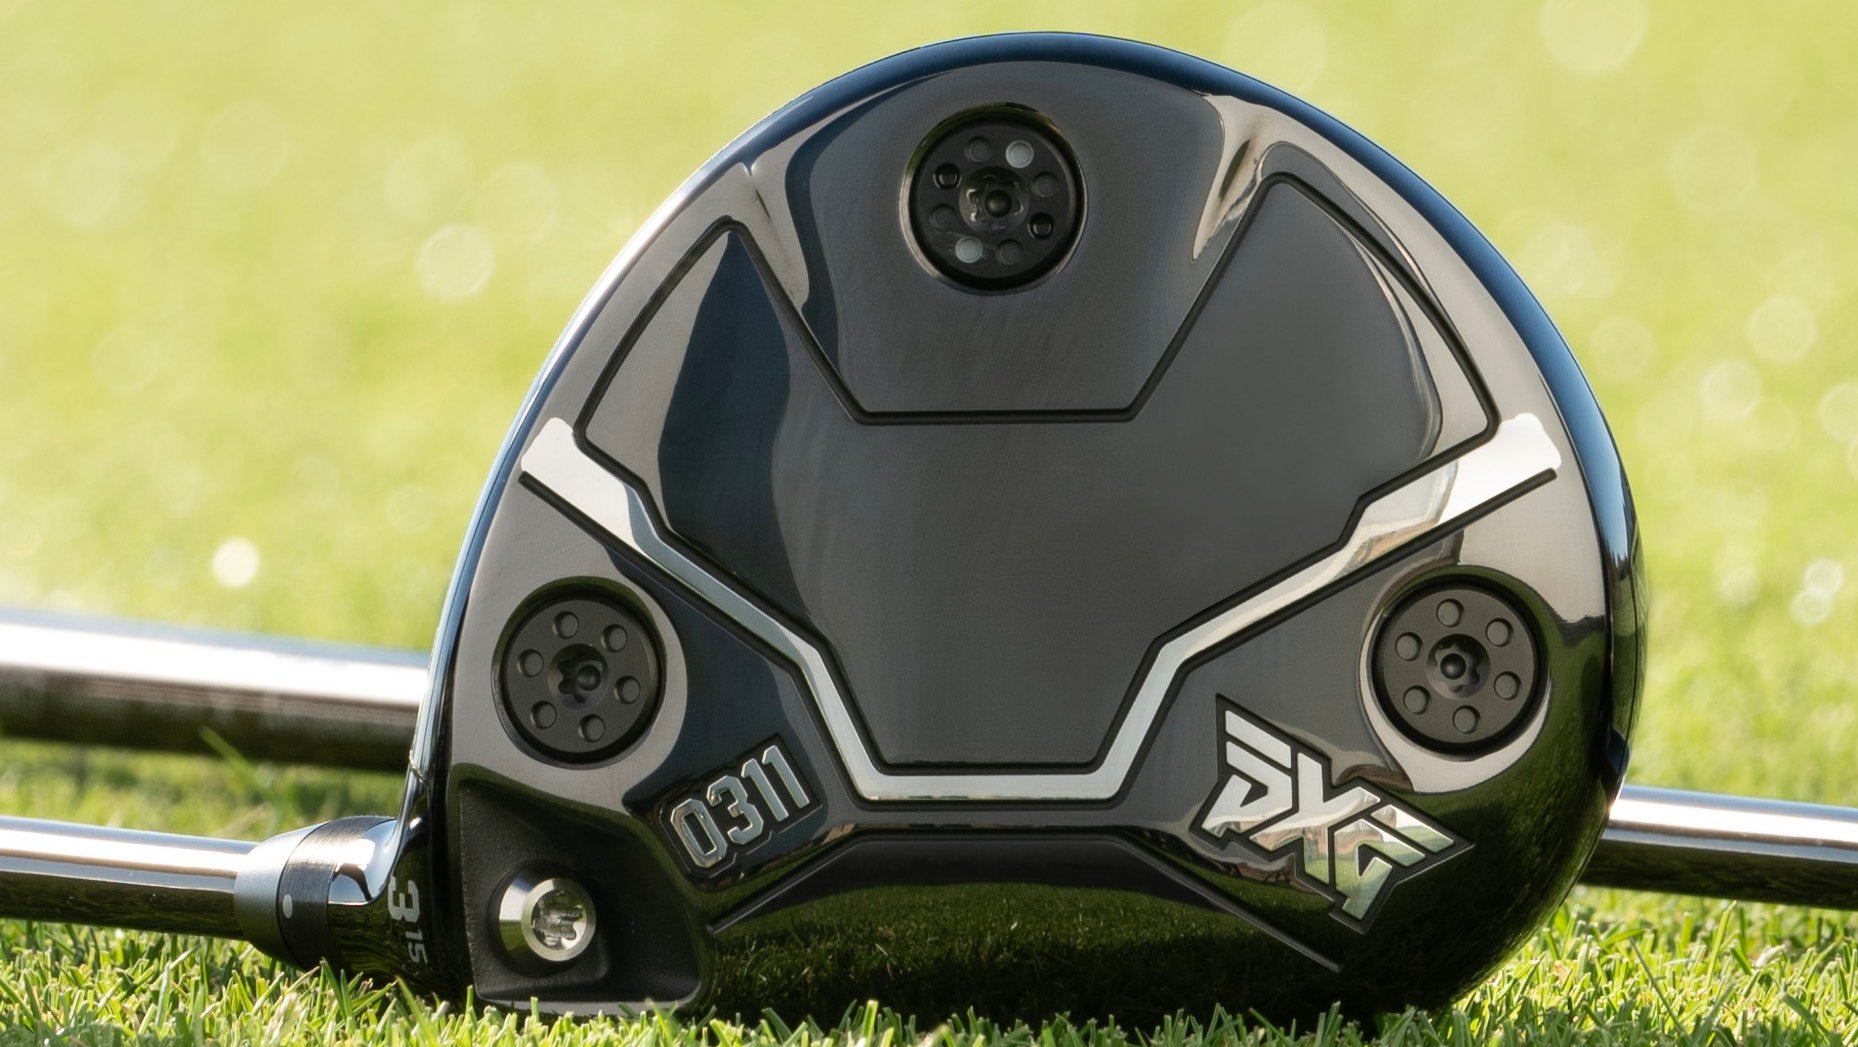 A pxg 0311 black ops fairway wood laying on grass.